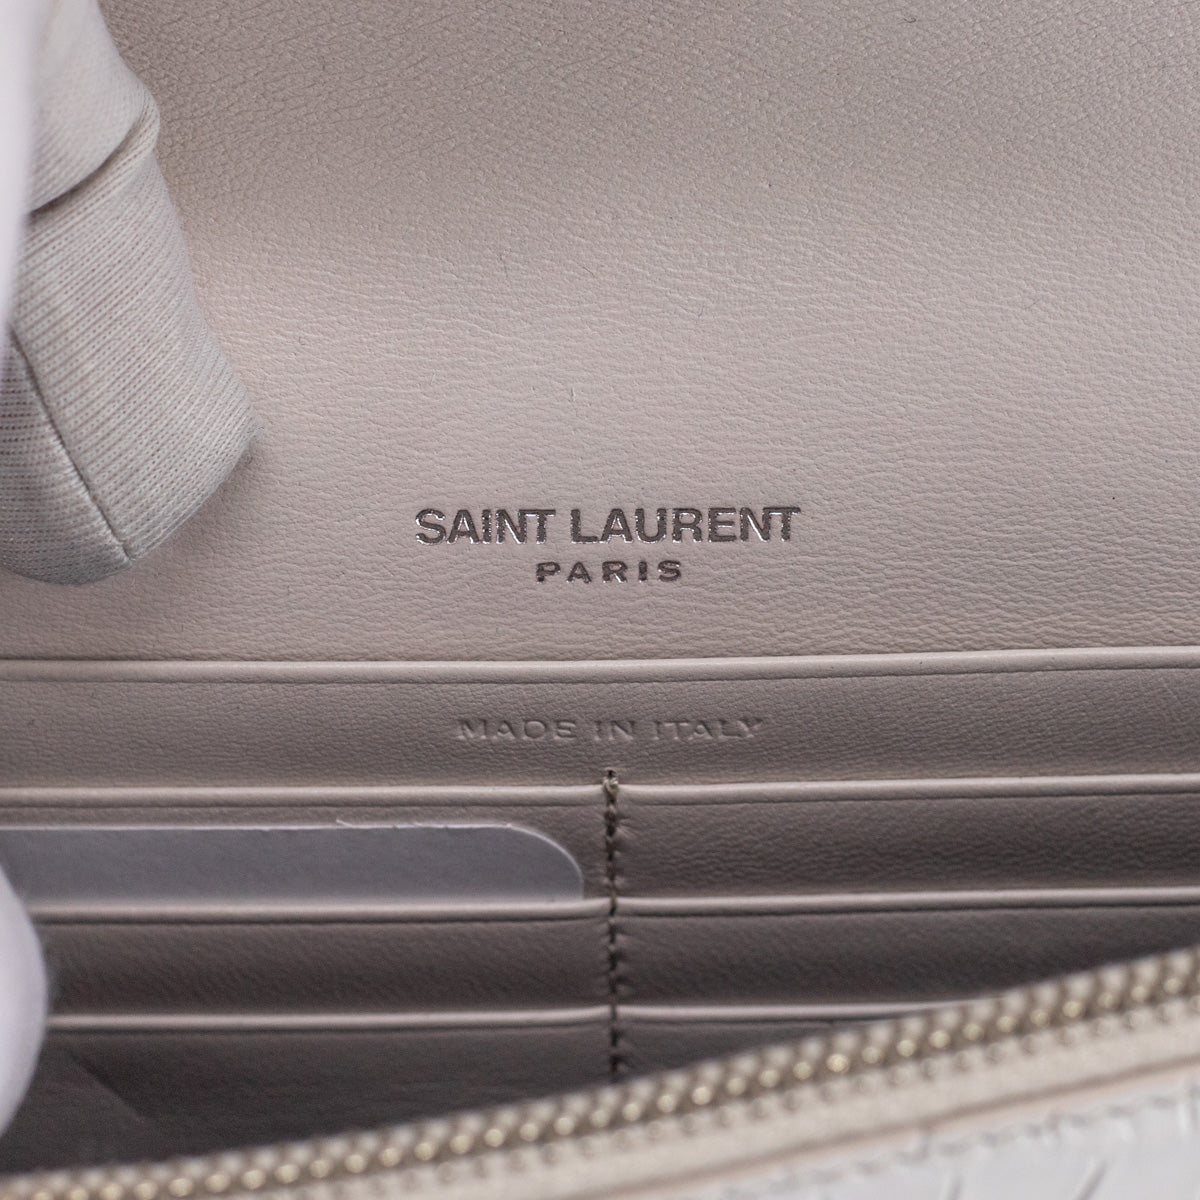 Saint Laurent Sunset Chain Wallet in Icy White